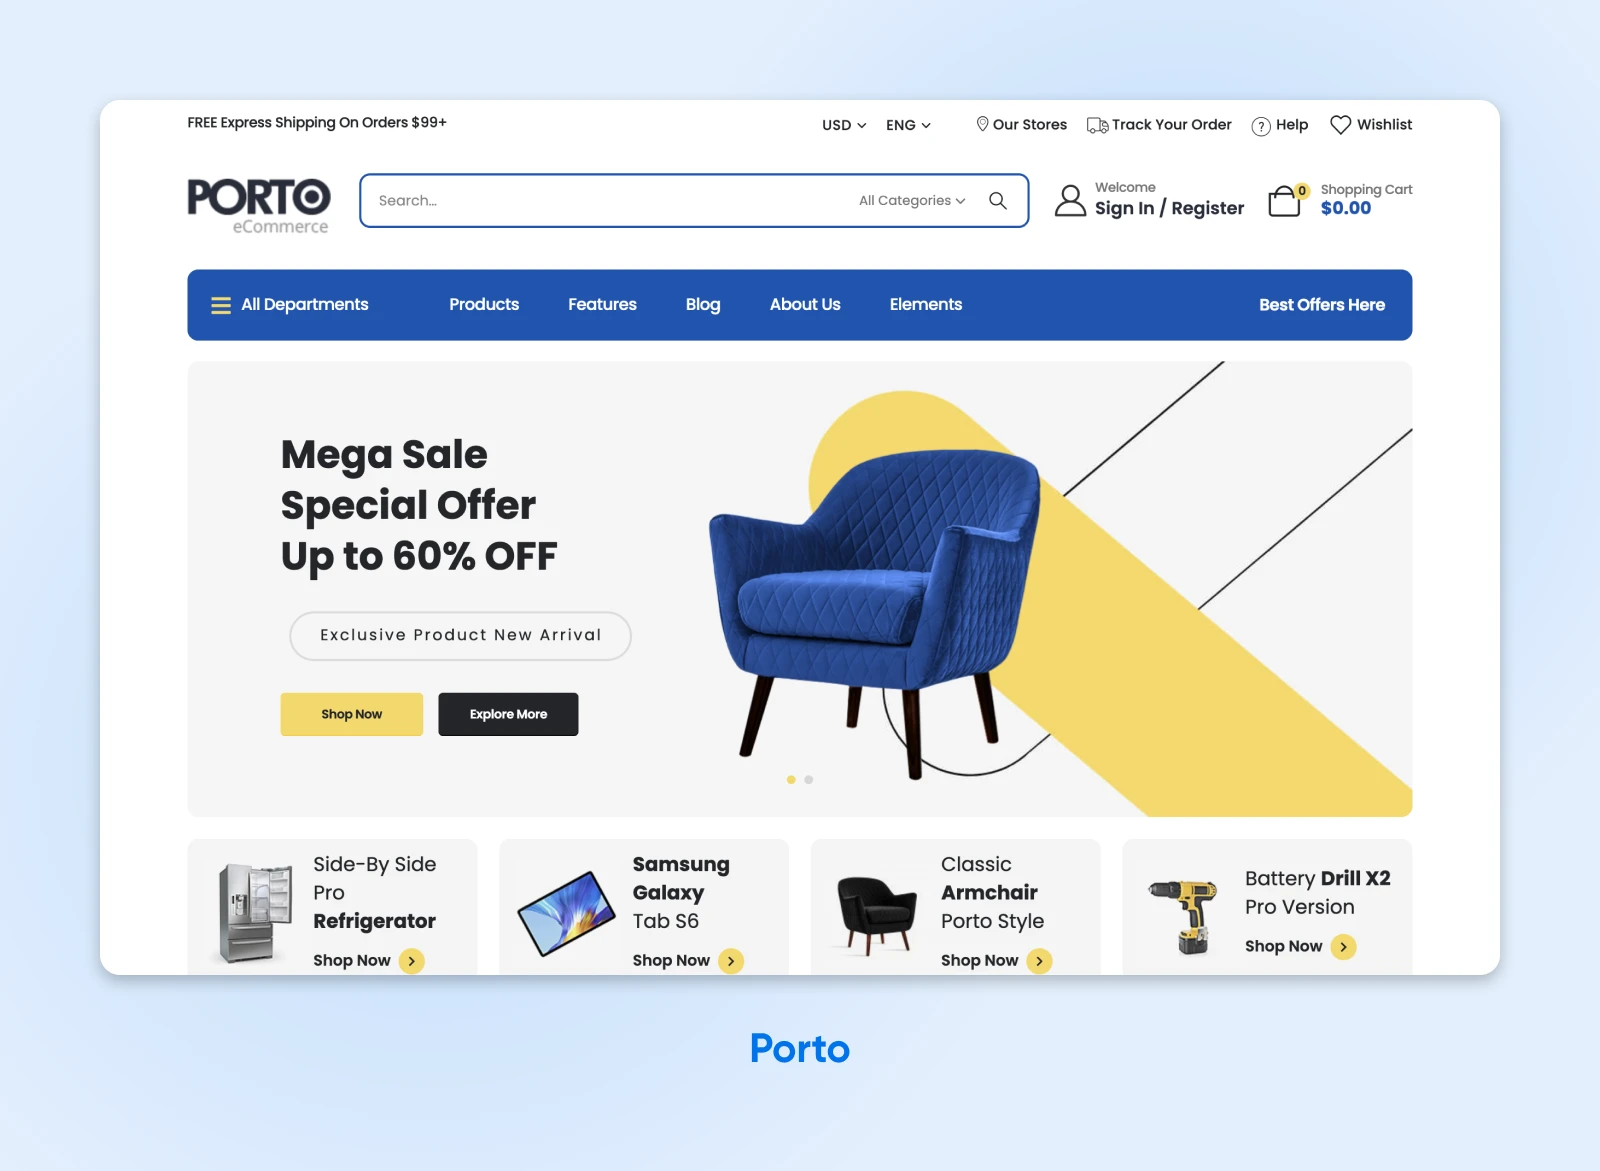 Porto's sample blue and yellow themed webpage with options to shop for furniture, gadgets, drills, etc.